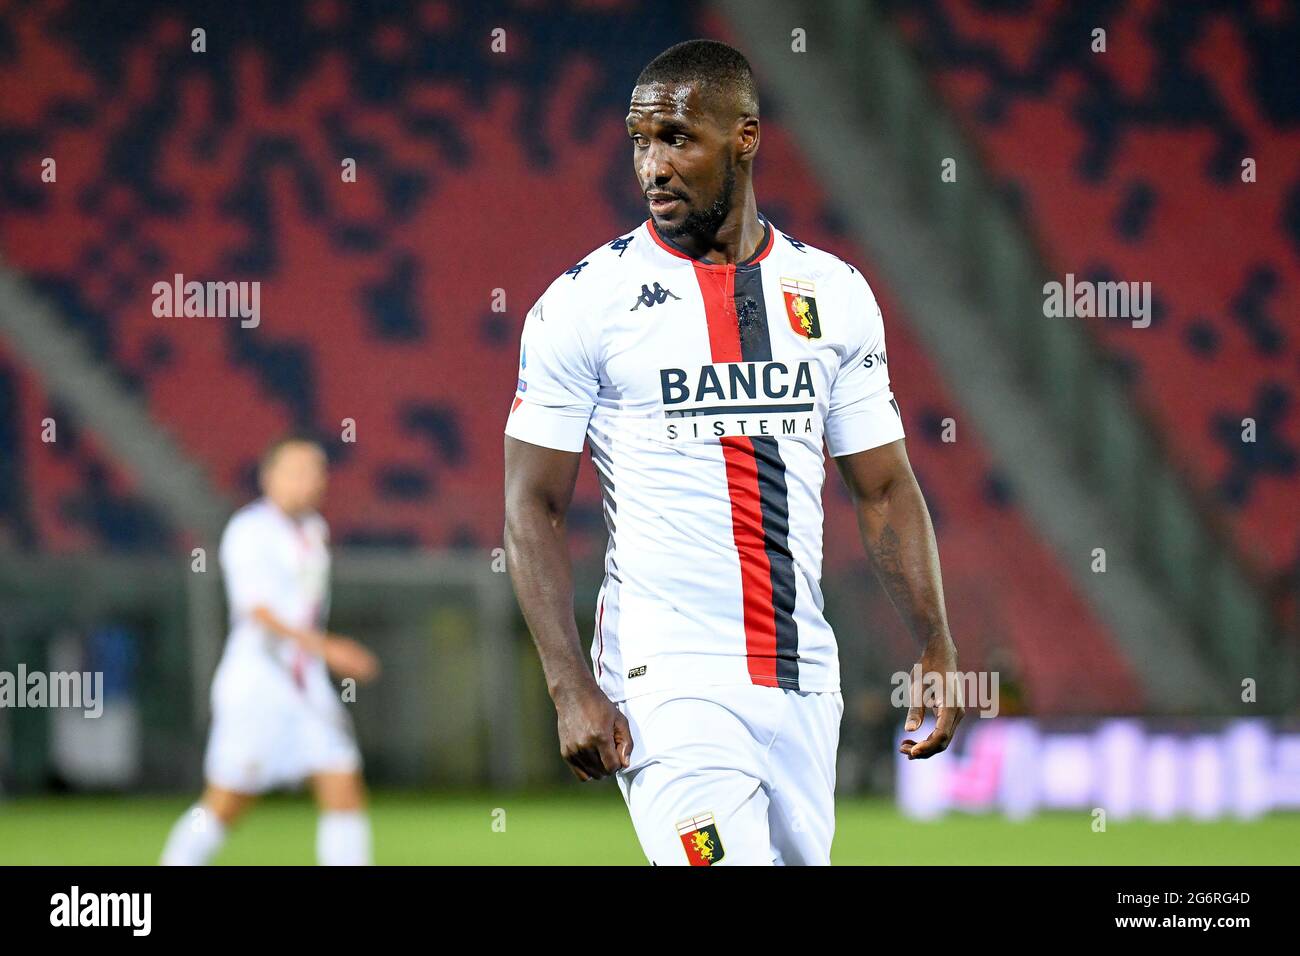 Bologna, Italy. 01st June, 2021. Cristian Zapata (Genoa) portrait during Genoa CFC season 2020/2021 (Archives), Italian football Serie A match in Bologna, Italy, June 01 2021 Credit: Independent Photo Agency/Alamy Live News Stock Photo